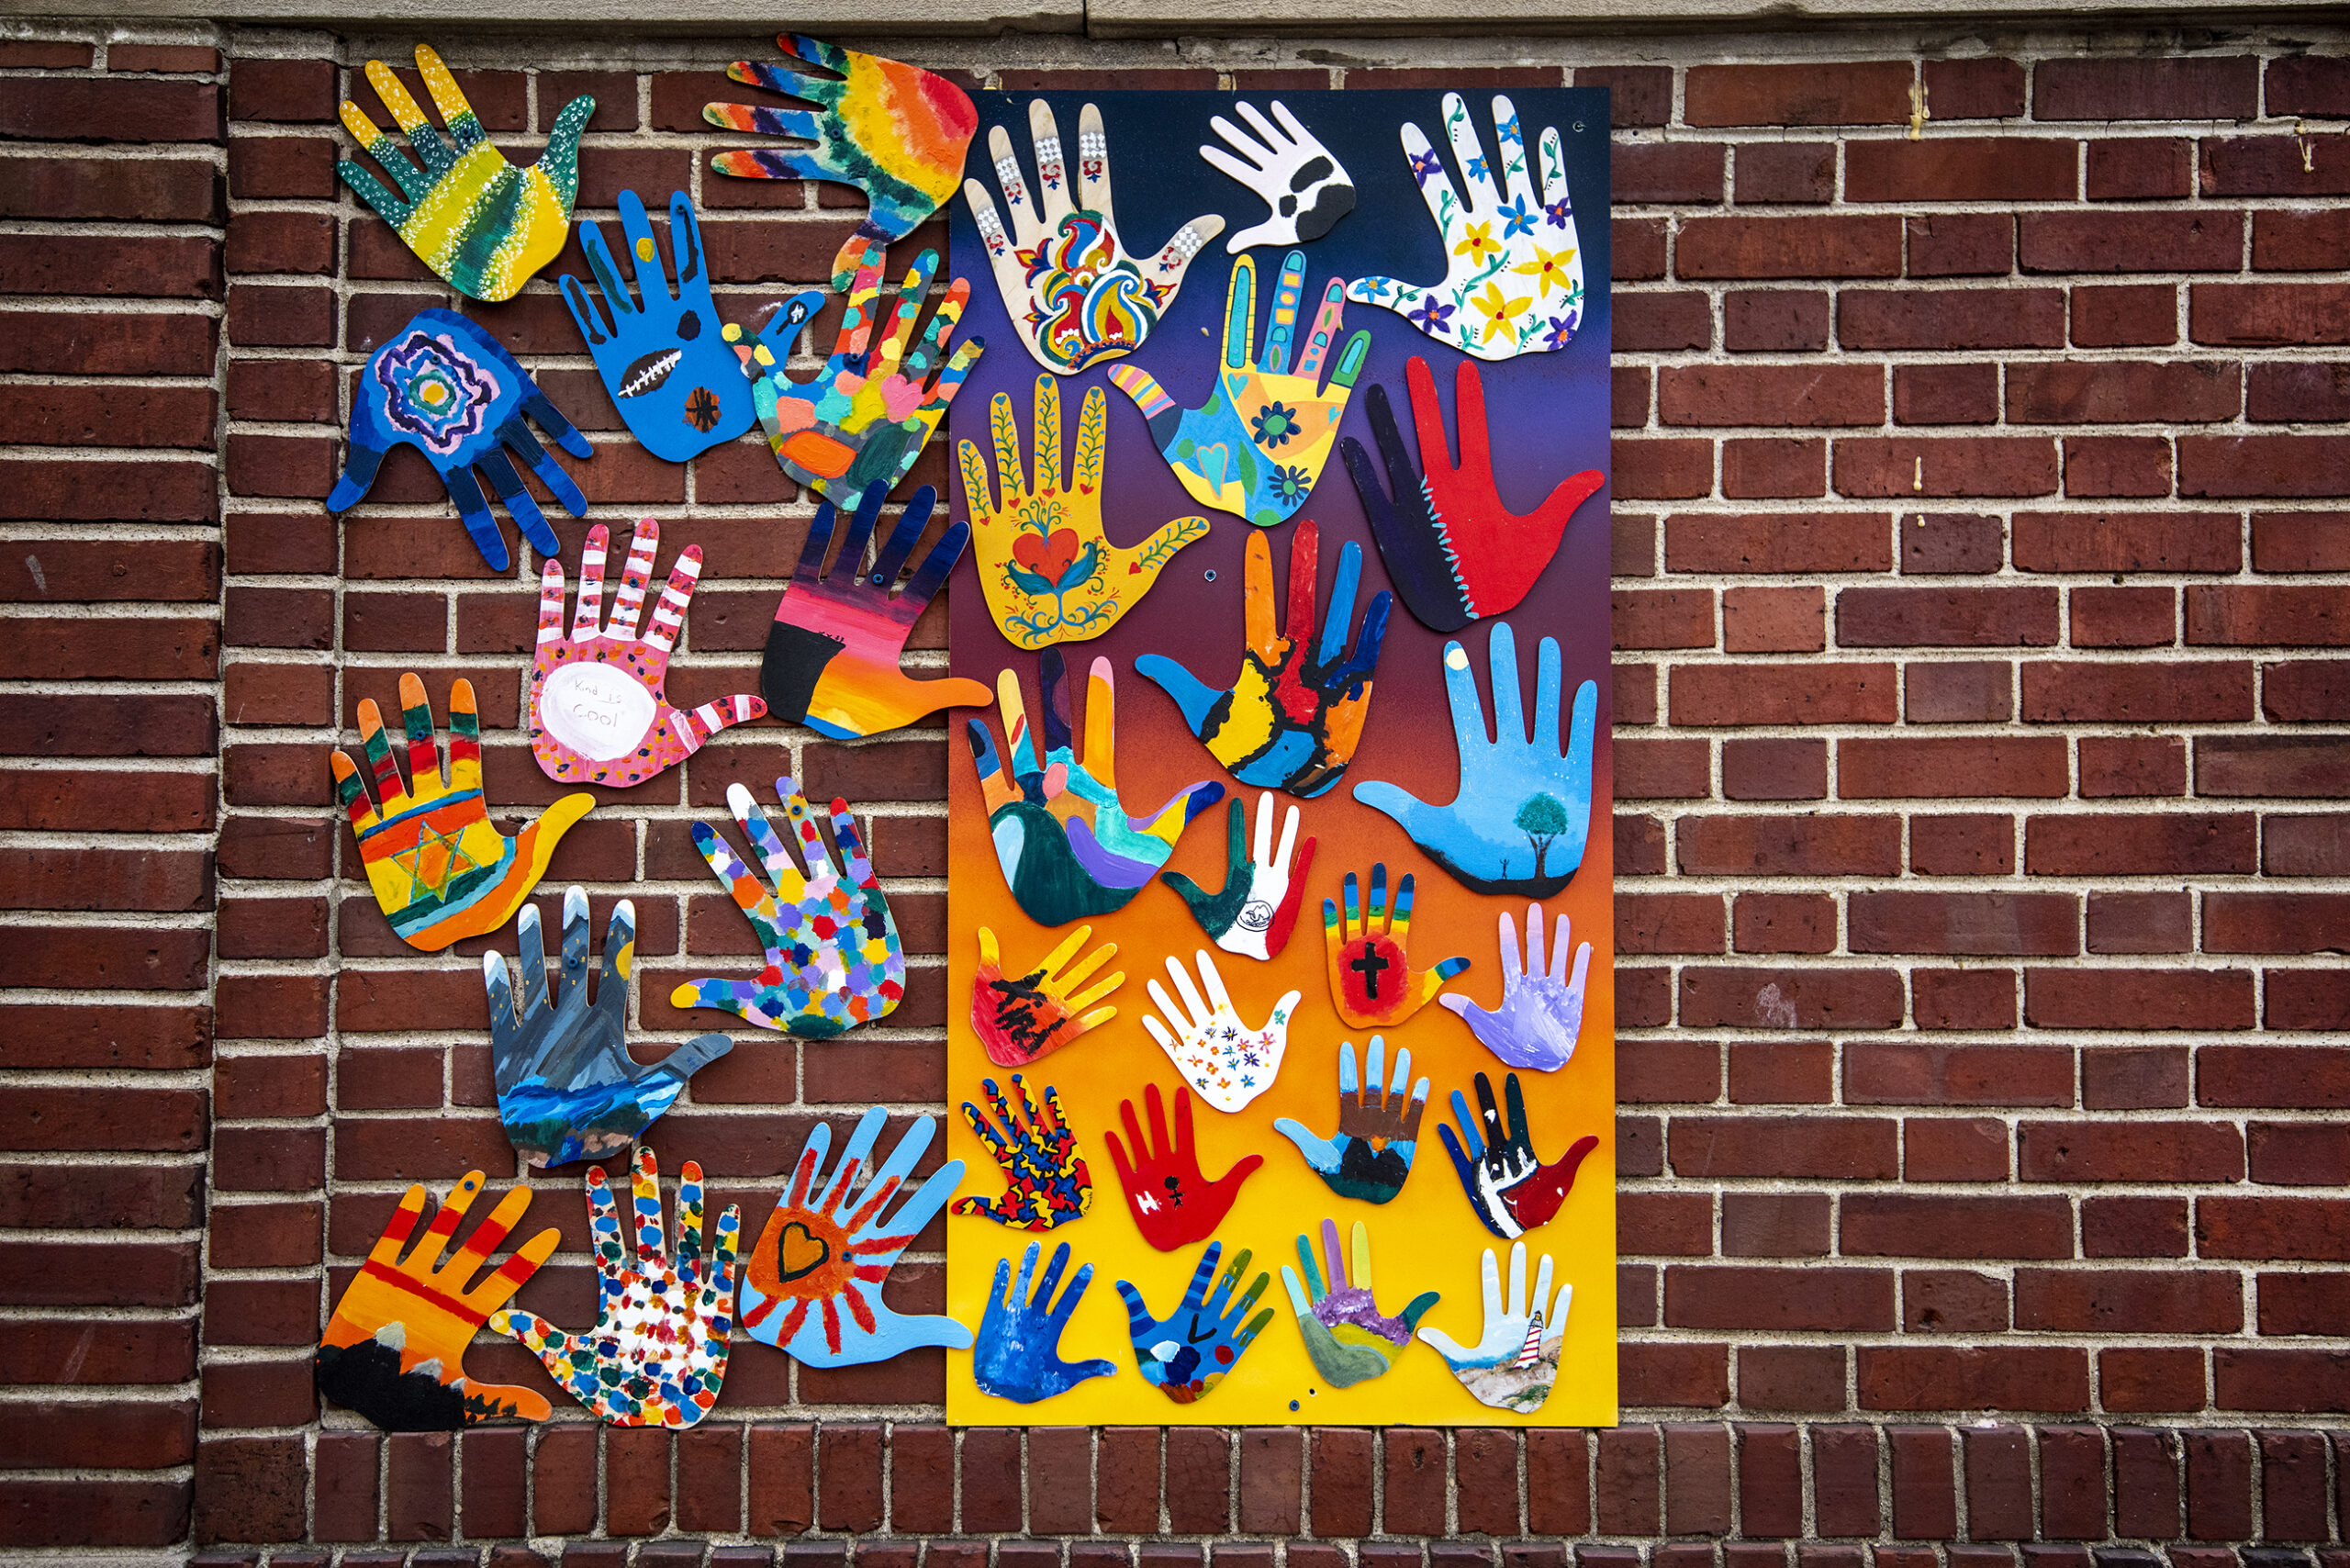 A painting of hands as bright colors is displayed on a brick wall.